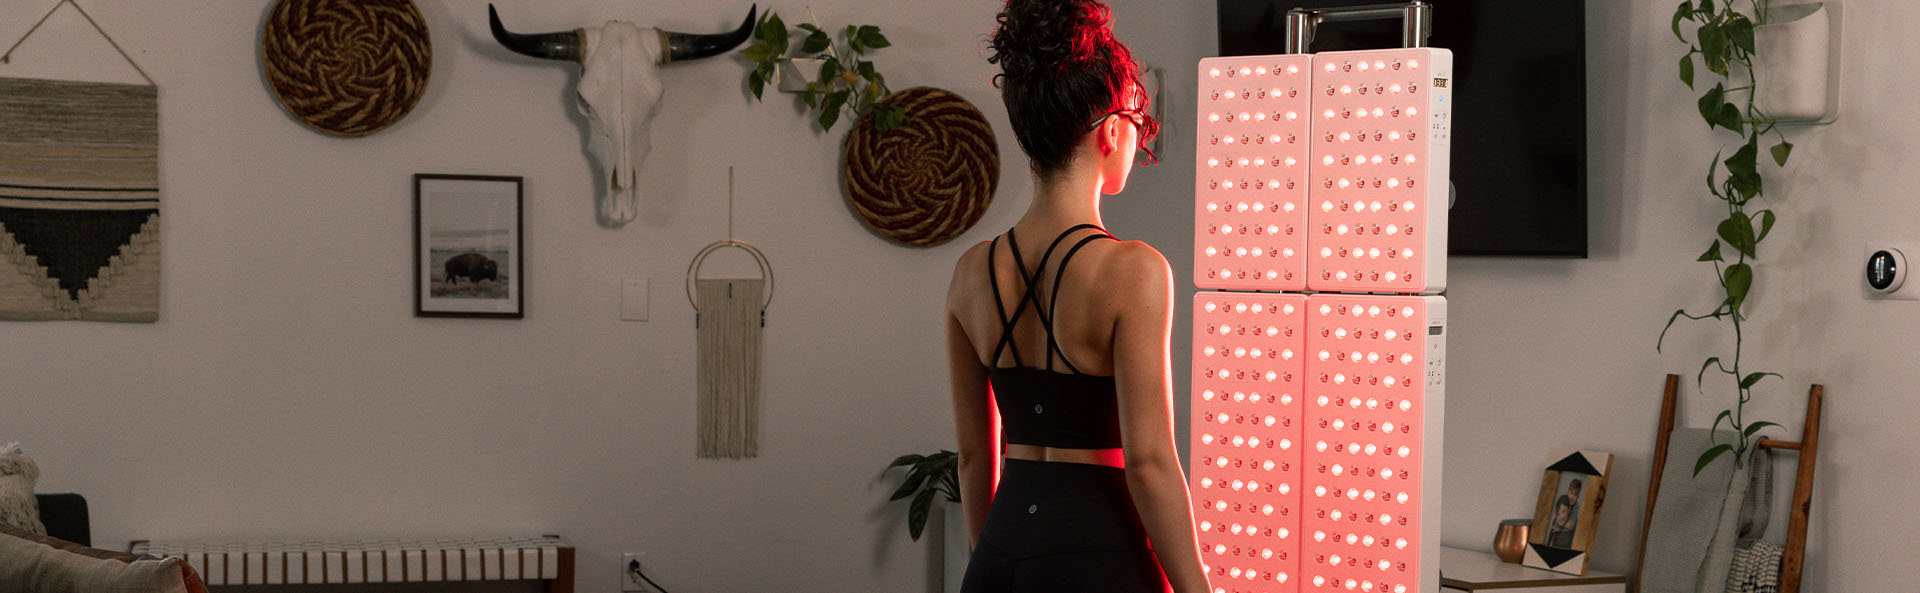 Best Red Light Therapy Devices For Full Body